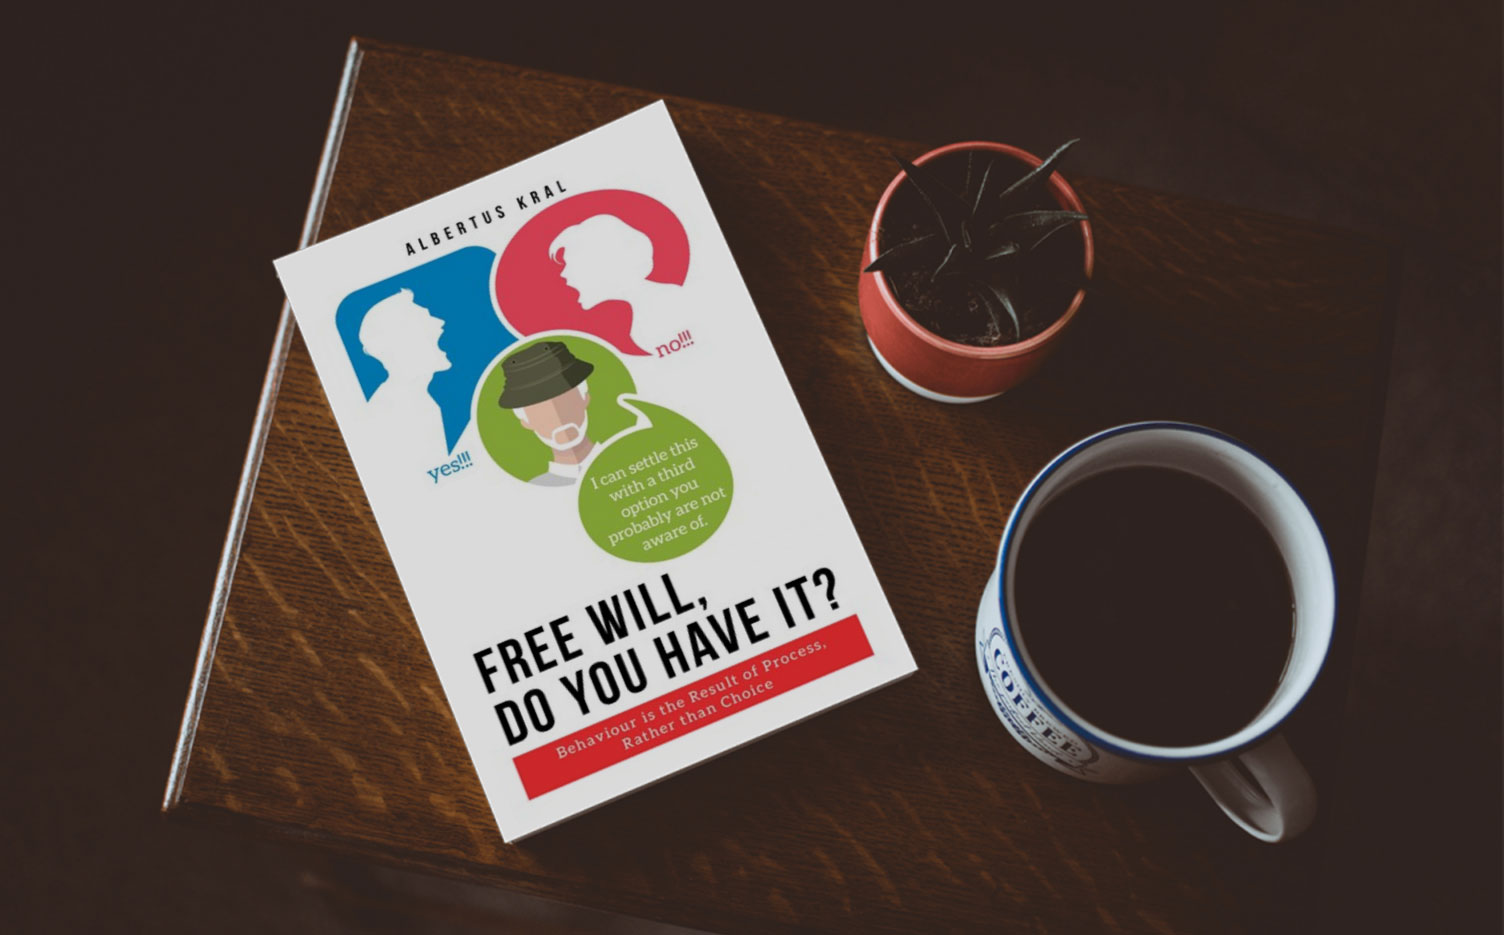 Free Will Do You Have It by Albertus Kral